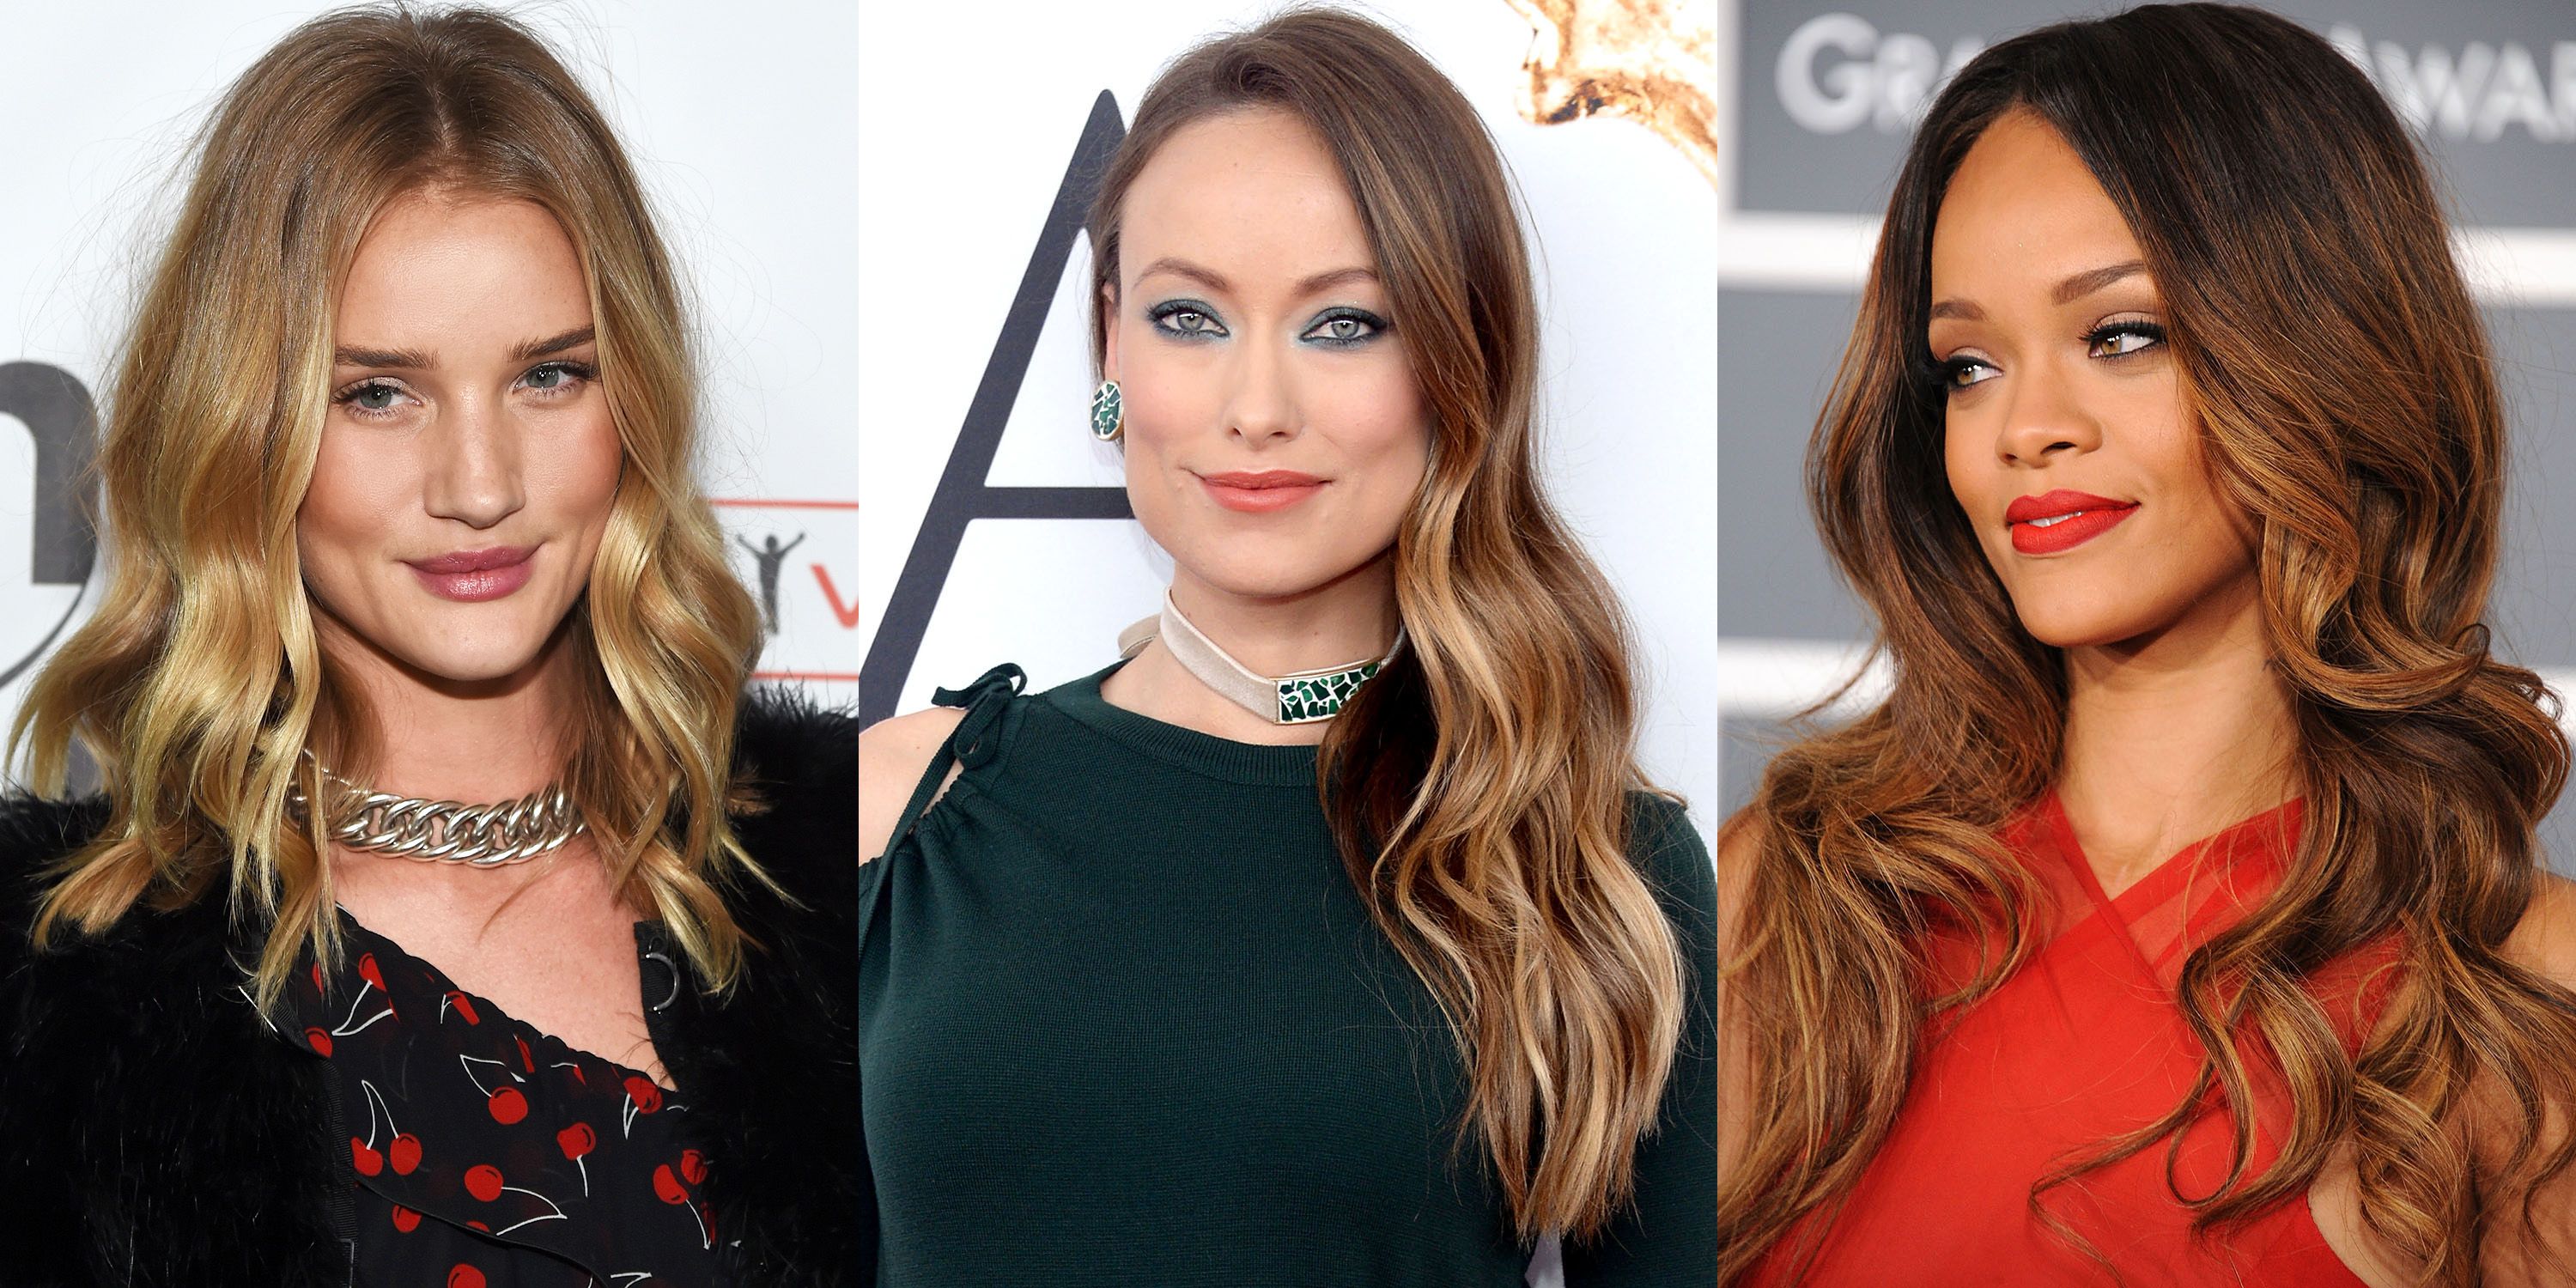 10 Best Auburn Hair Color Shades - 10 Celebrities With Red Brown Hair